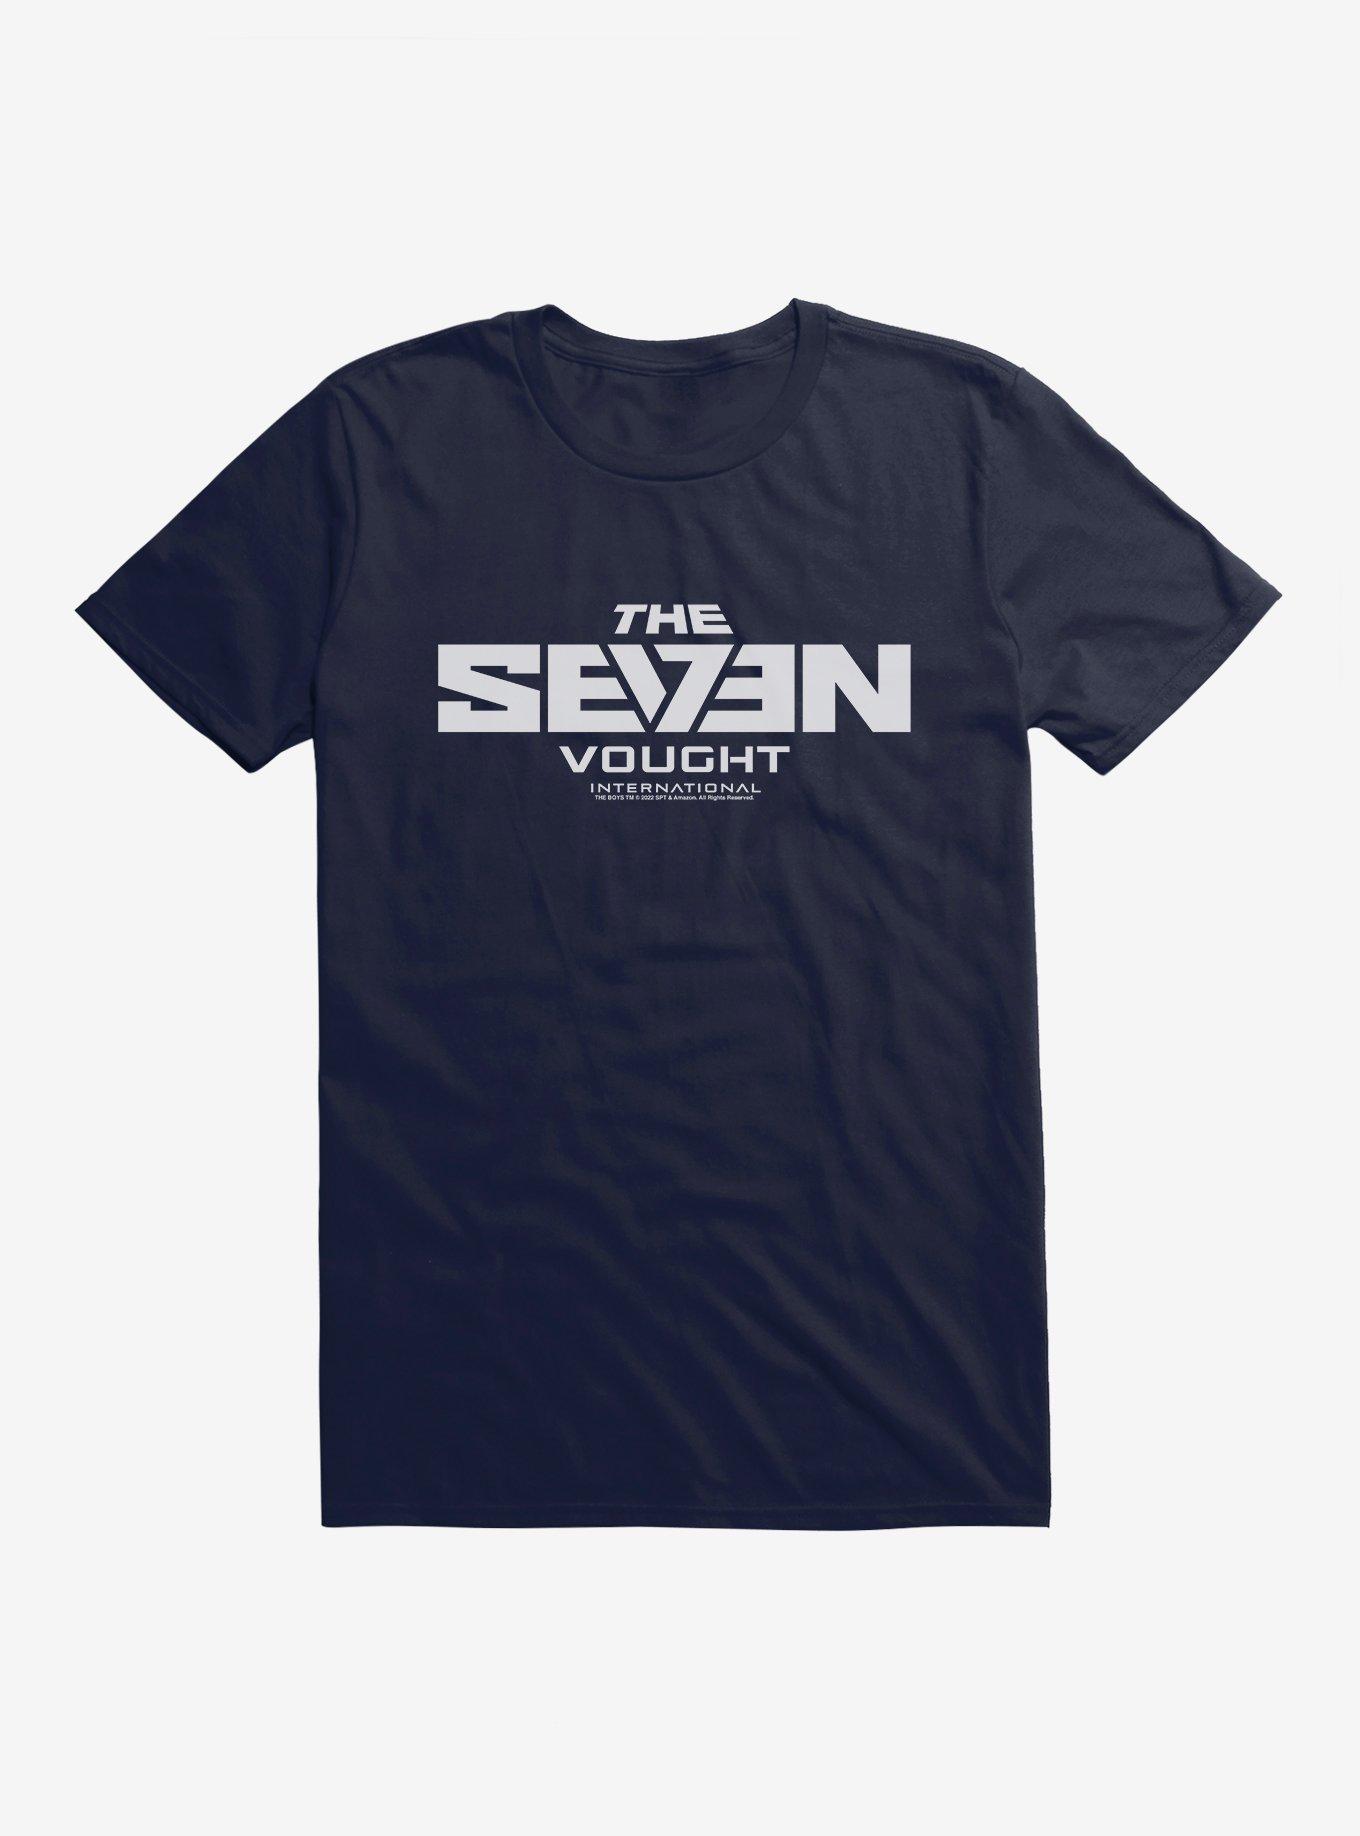 The Boys The Seven By Vought Intl. T-Shirt, , hi-res